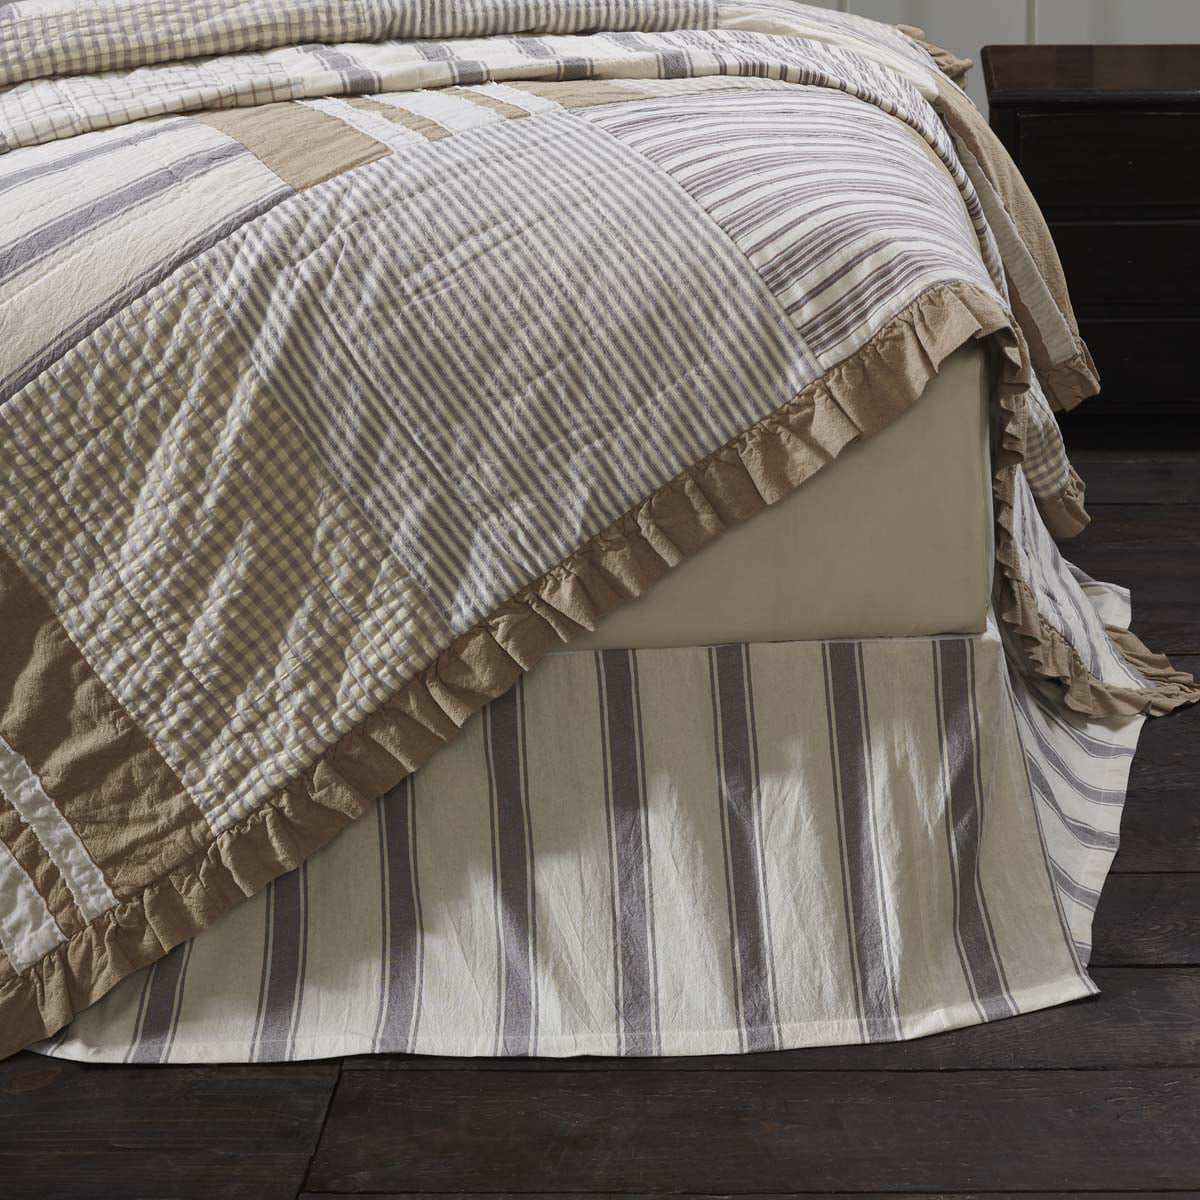 SAWYER MILL Twin Bed Skirt Farmhouse Country Charcoal Gray/Creme Stripe VHC 